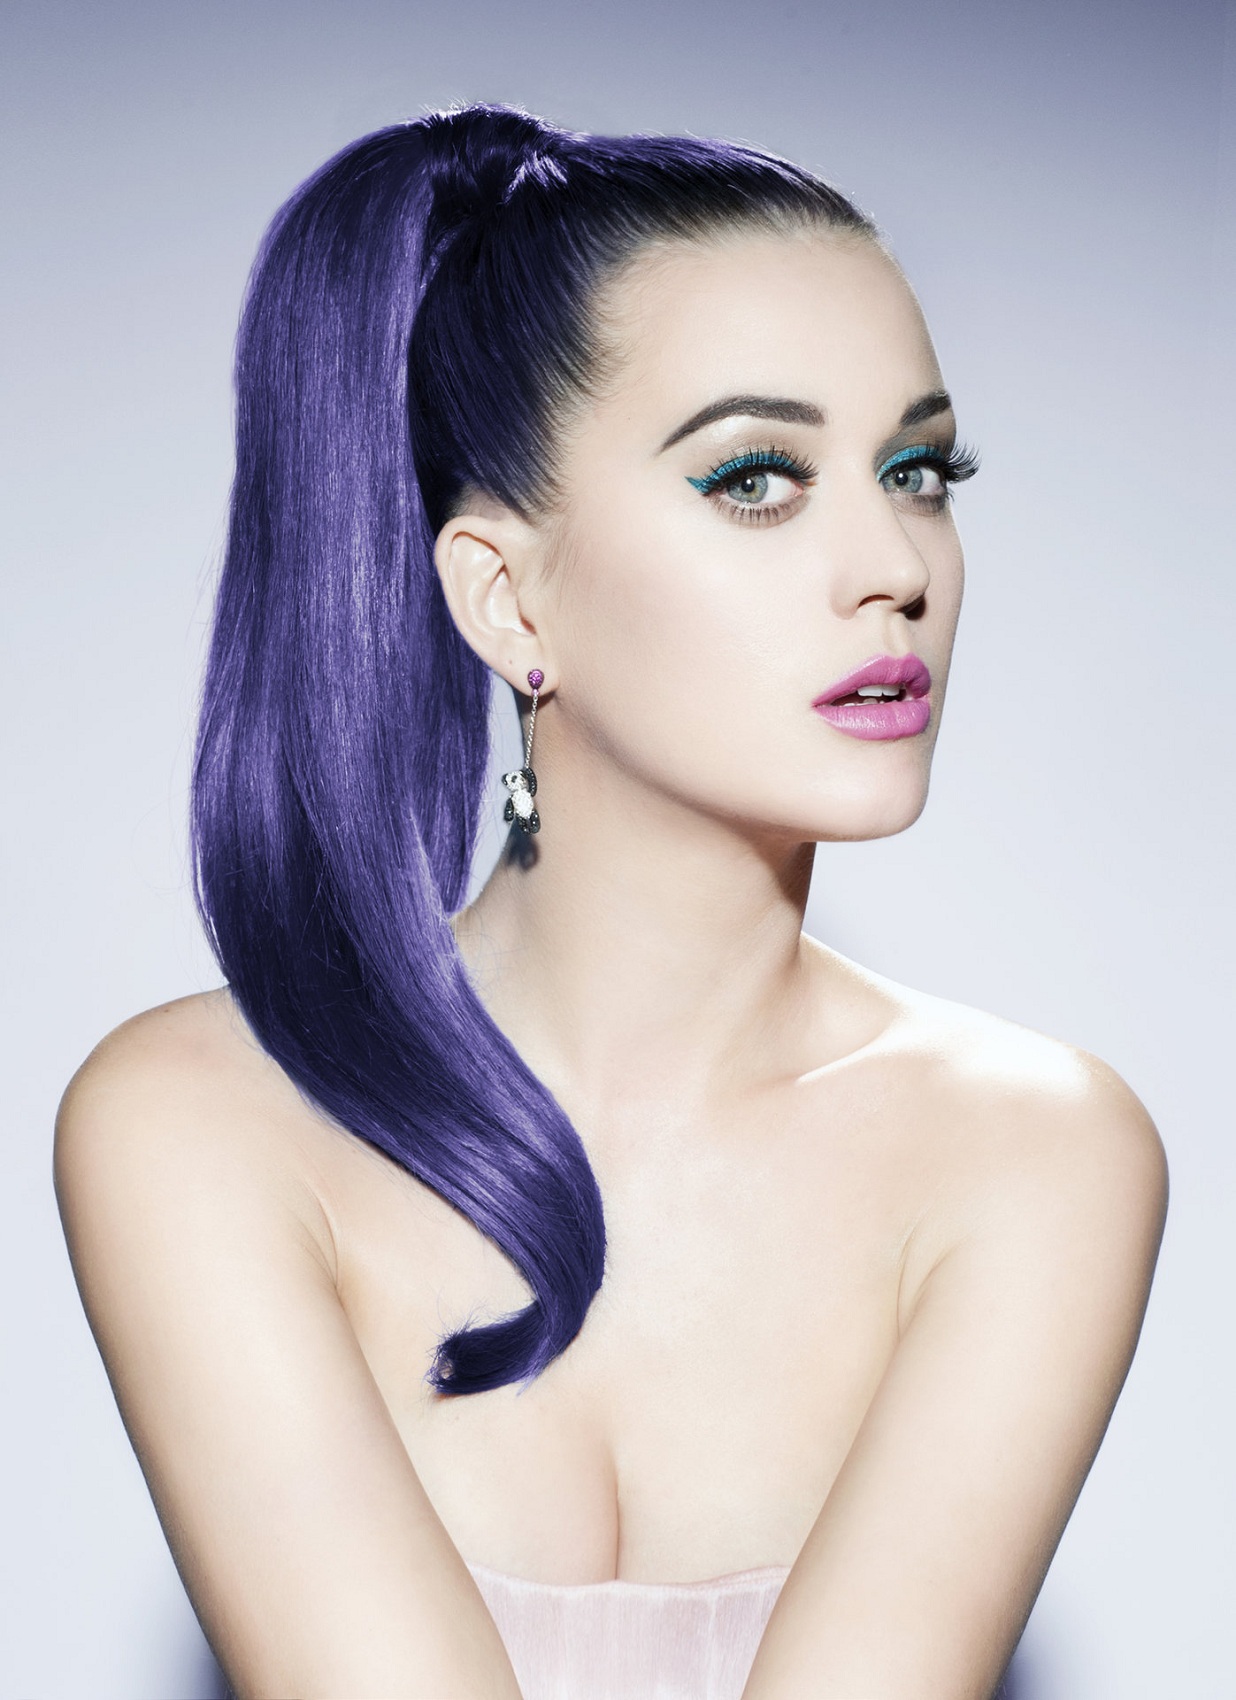 Katy Perry Hot 2017 Wallpapers